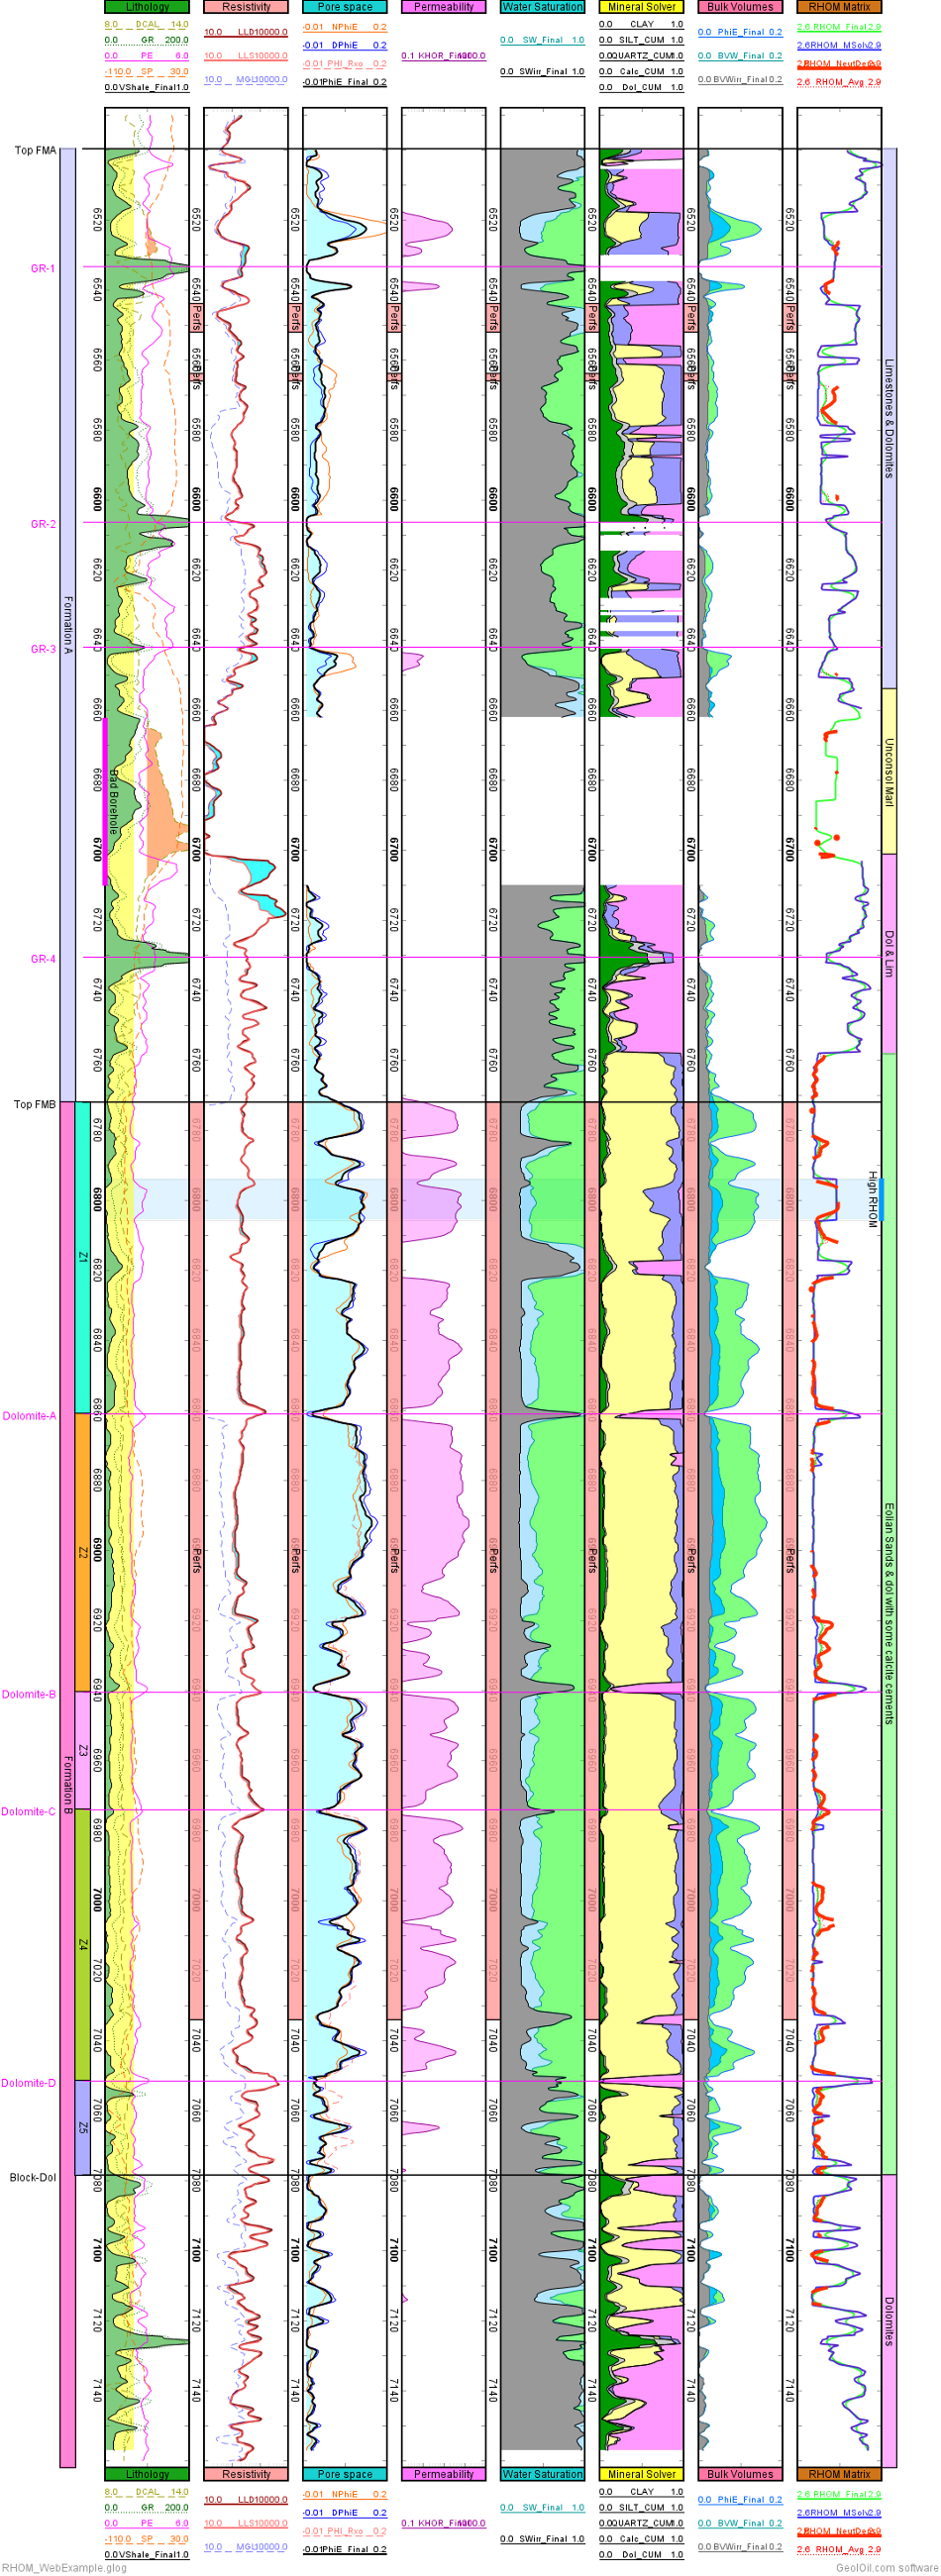 Log plot showing estimates of RHOM through a mineral solver and neutron to density contrast